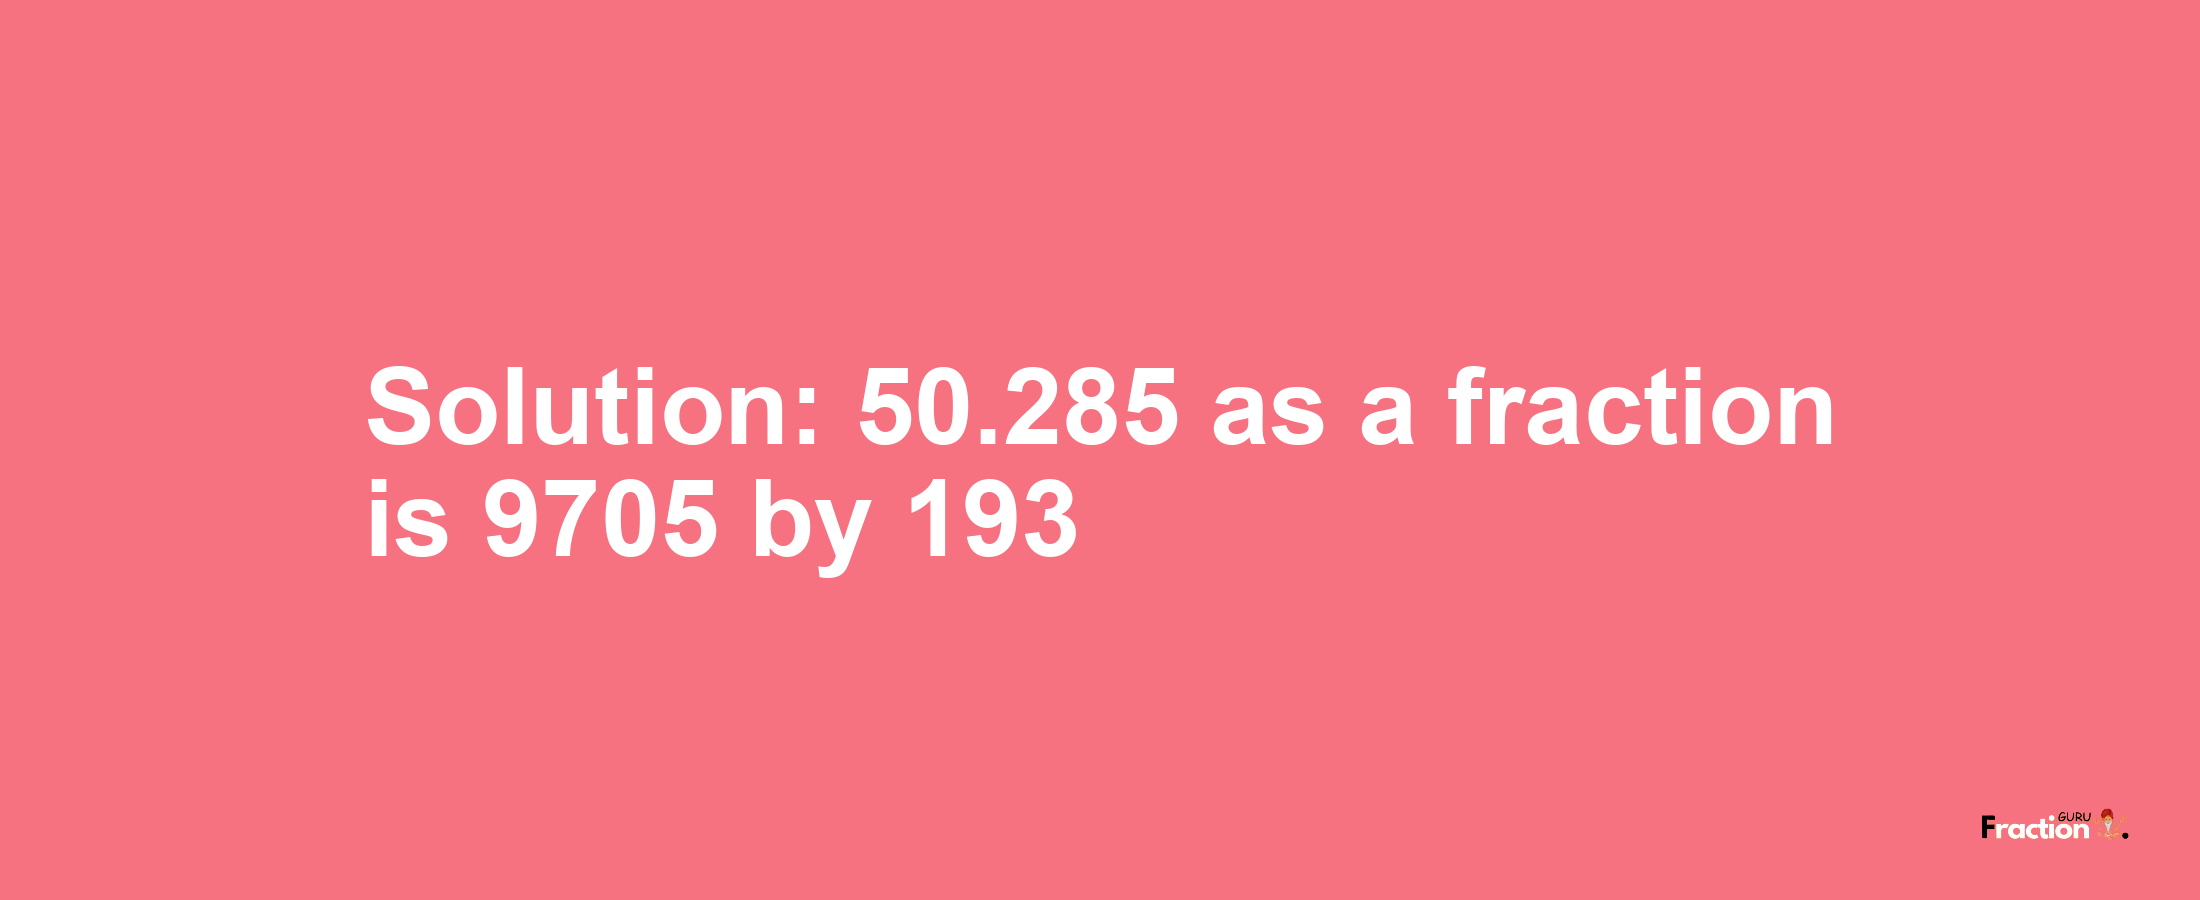 Solution:50.285 as a fraction is 9705/193